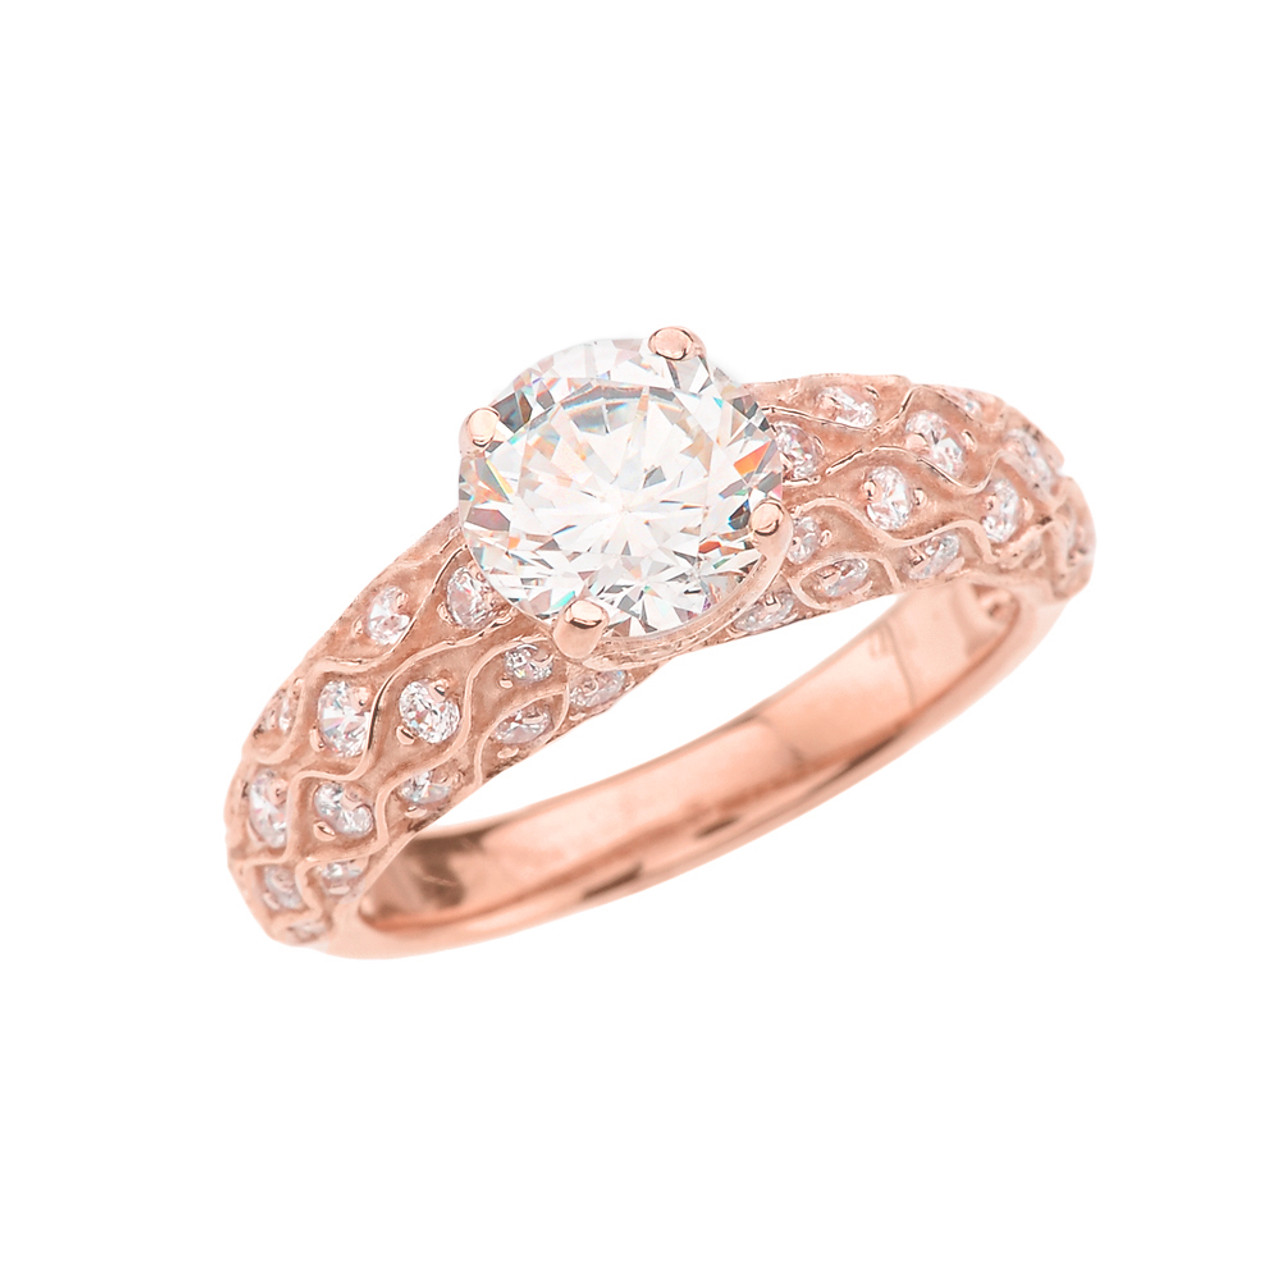  Rose  Gold  Engagement  Ring  With Cubic  Zirconia  Center